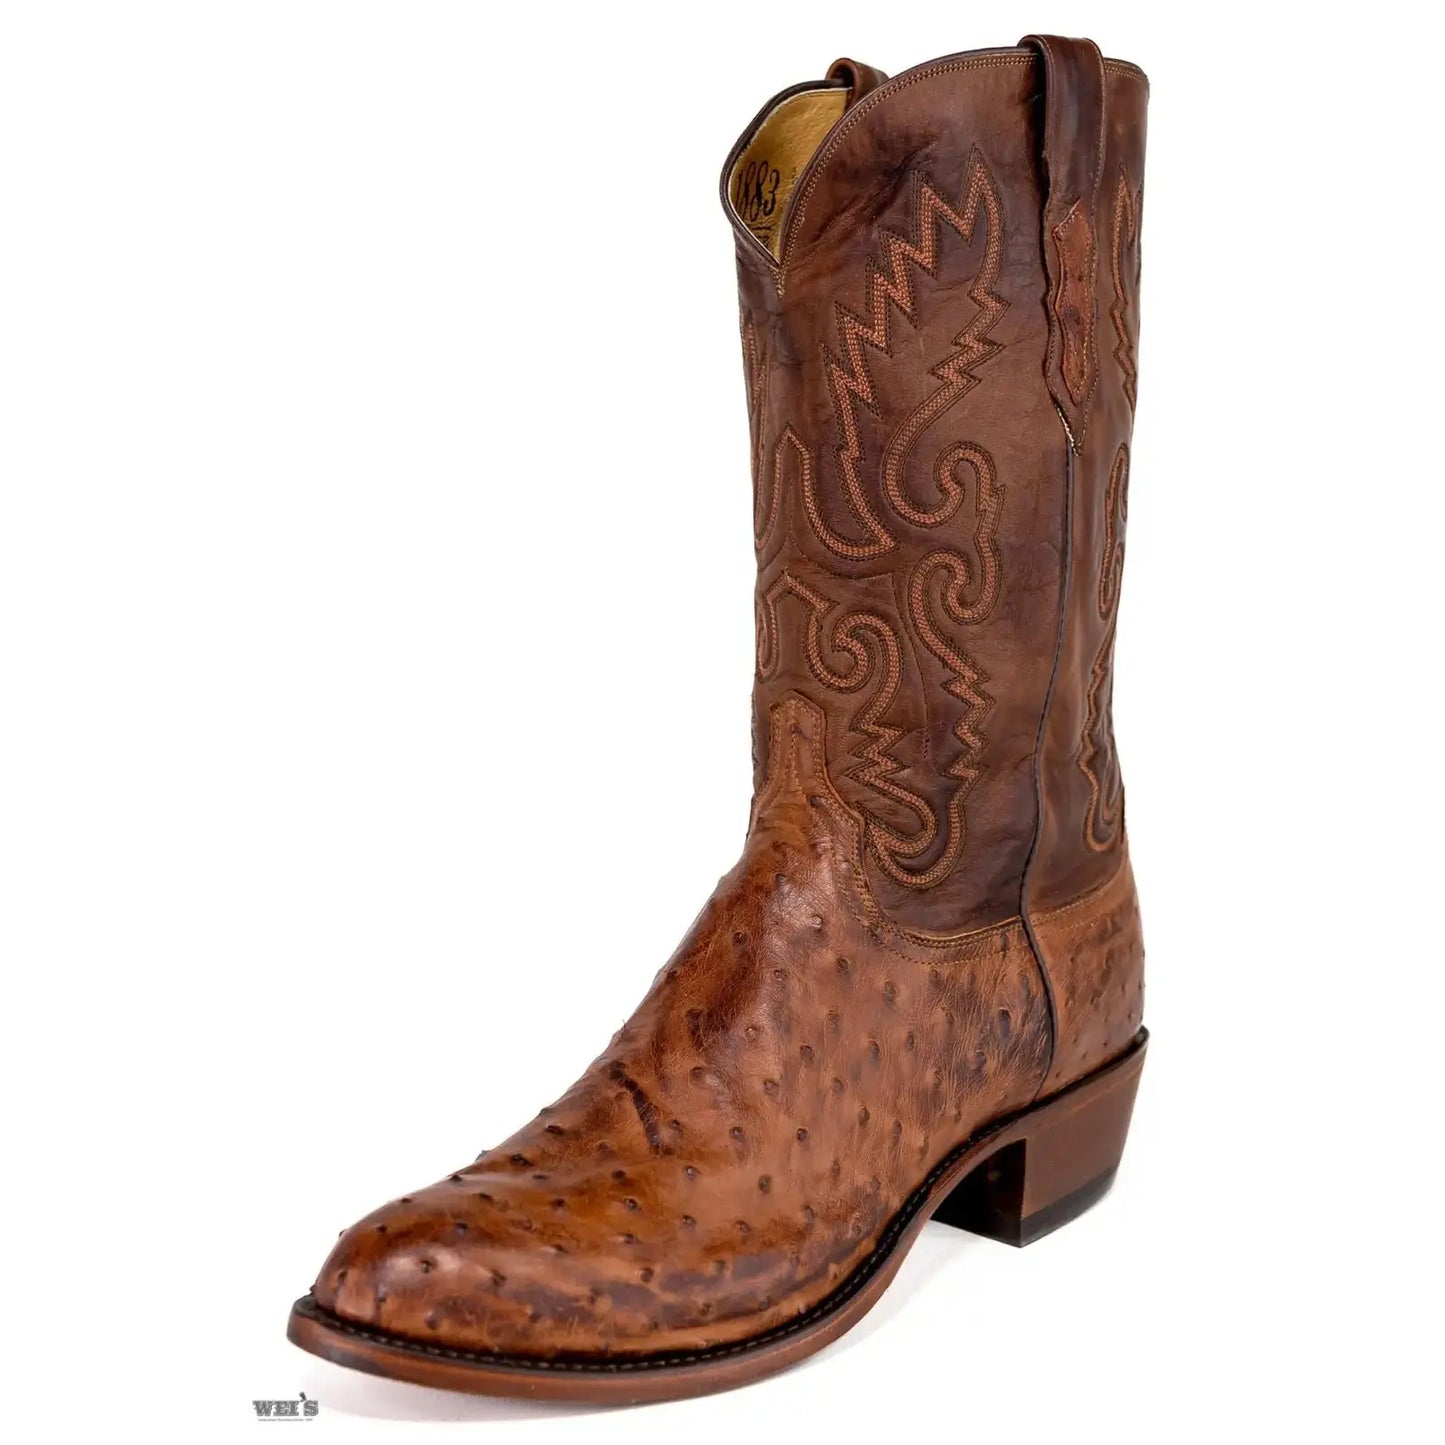 Lucchese 1883 Men's Cowboy Boots 13" Exotic Ostrich N1062 R4-EE